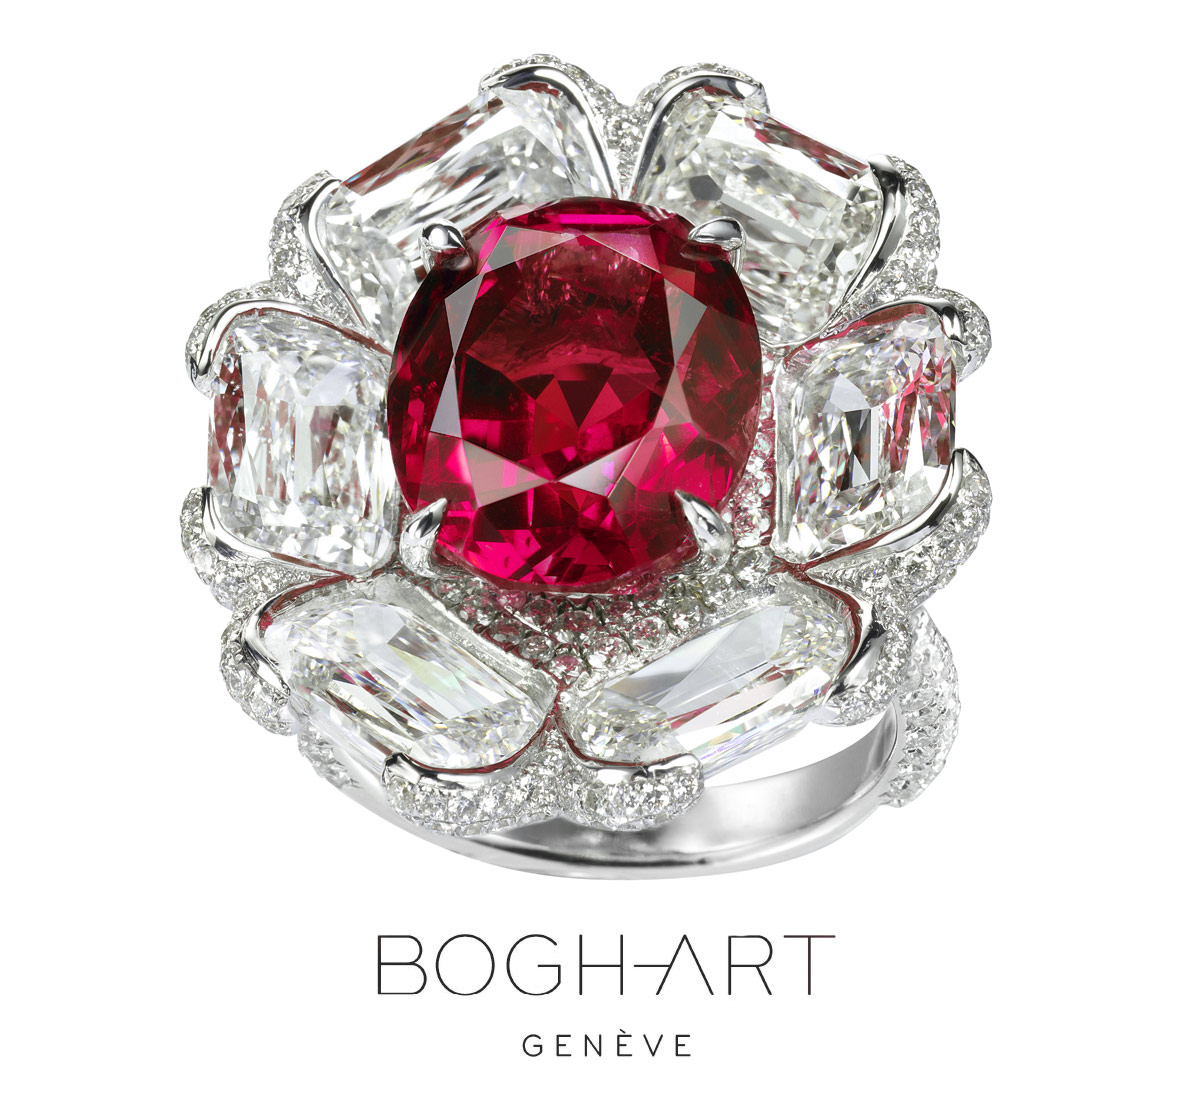 BOGH-ART ring with an oval Burmese ruby and diamonds, no indication of heat treatment